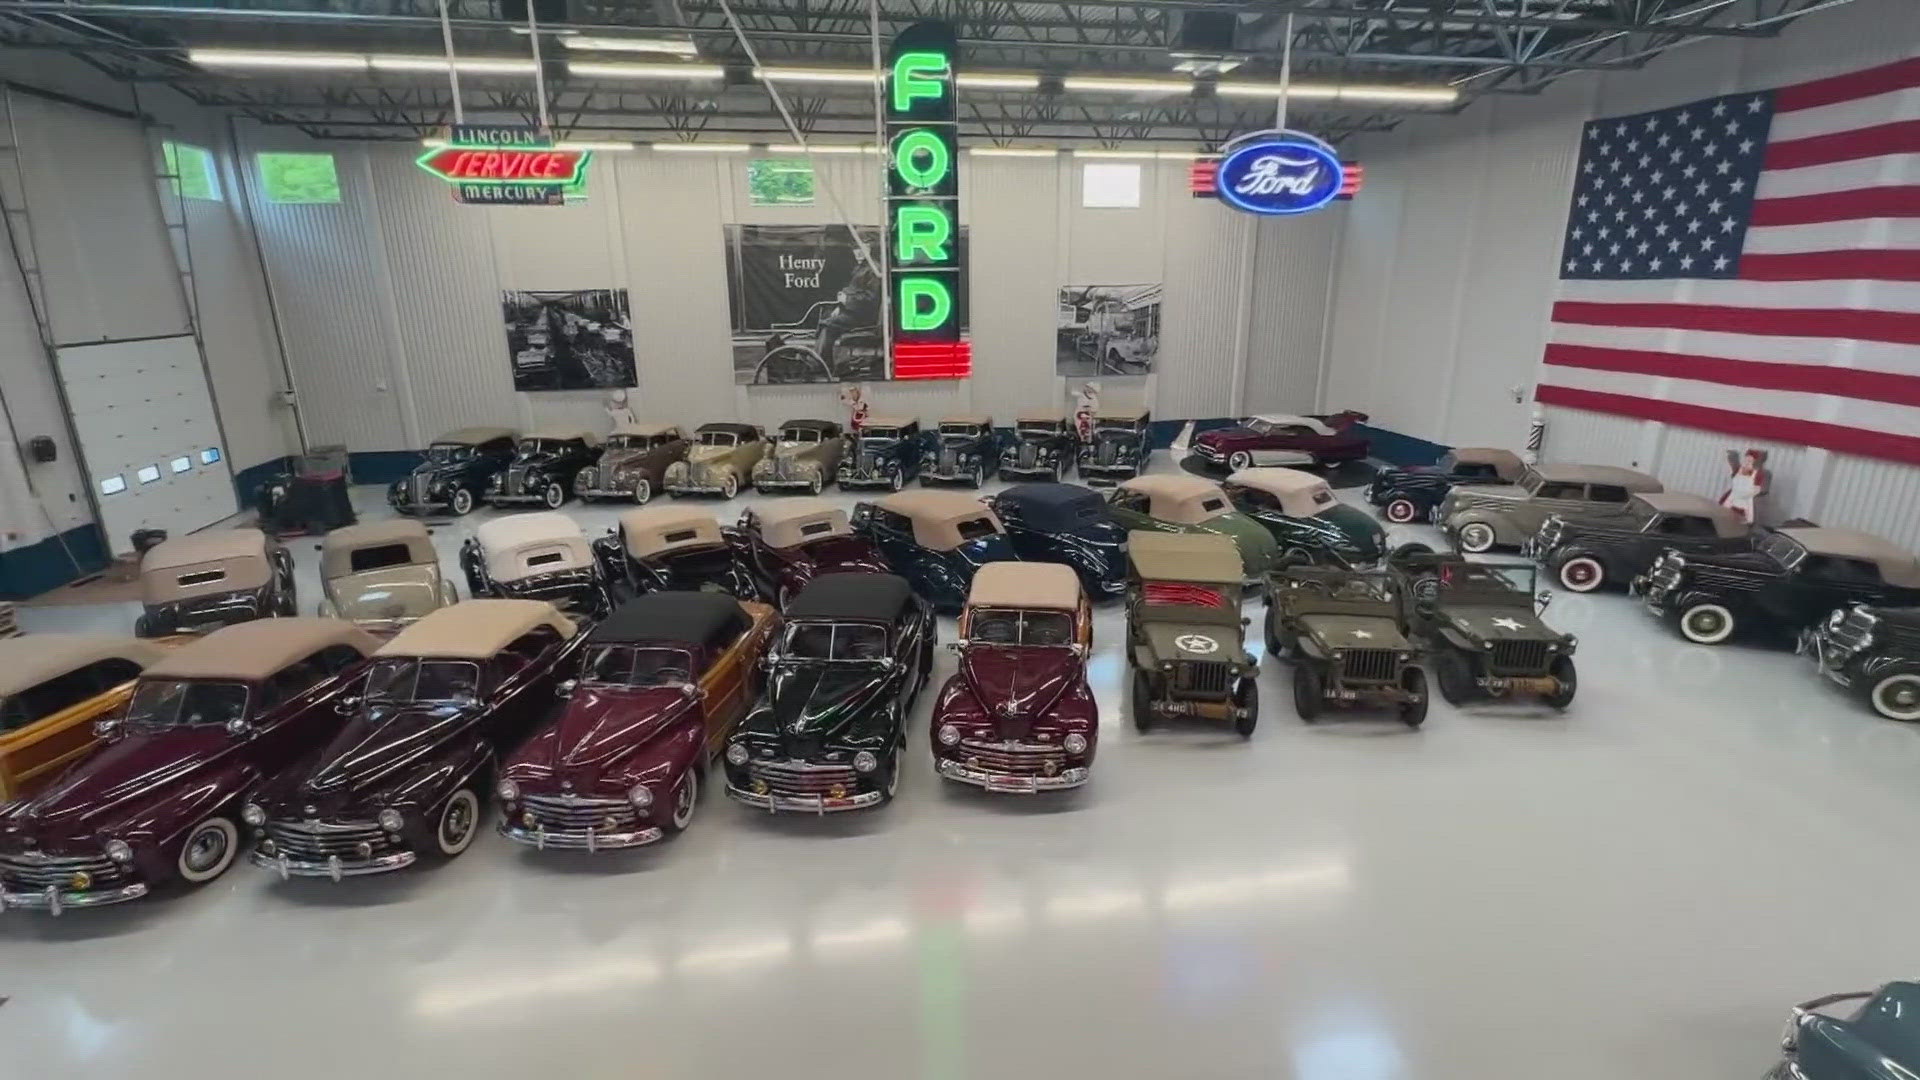 Peter Prescott has a collection of 200 cars, all kept in great condition.